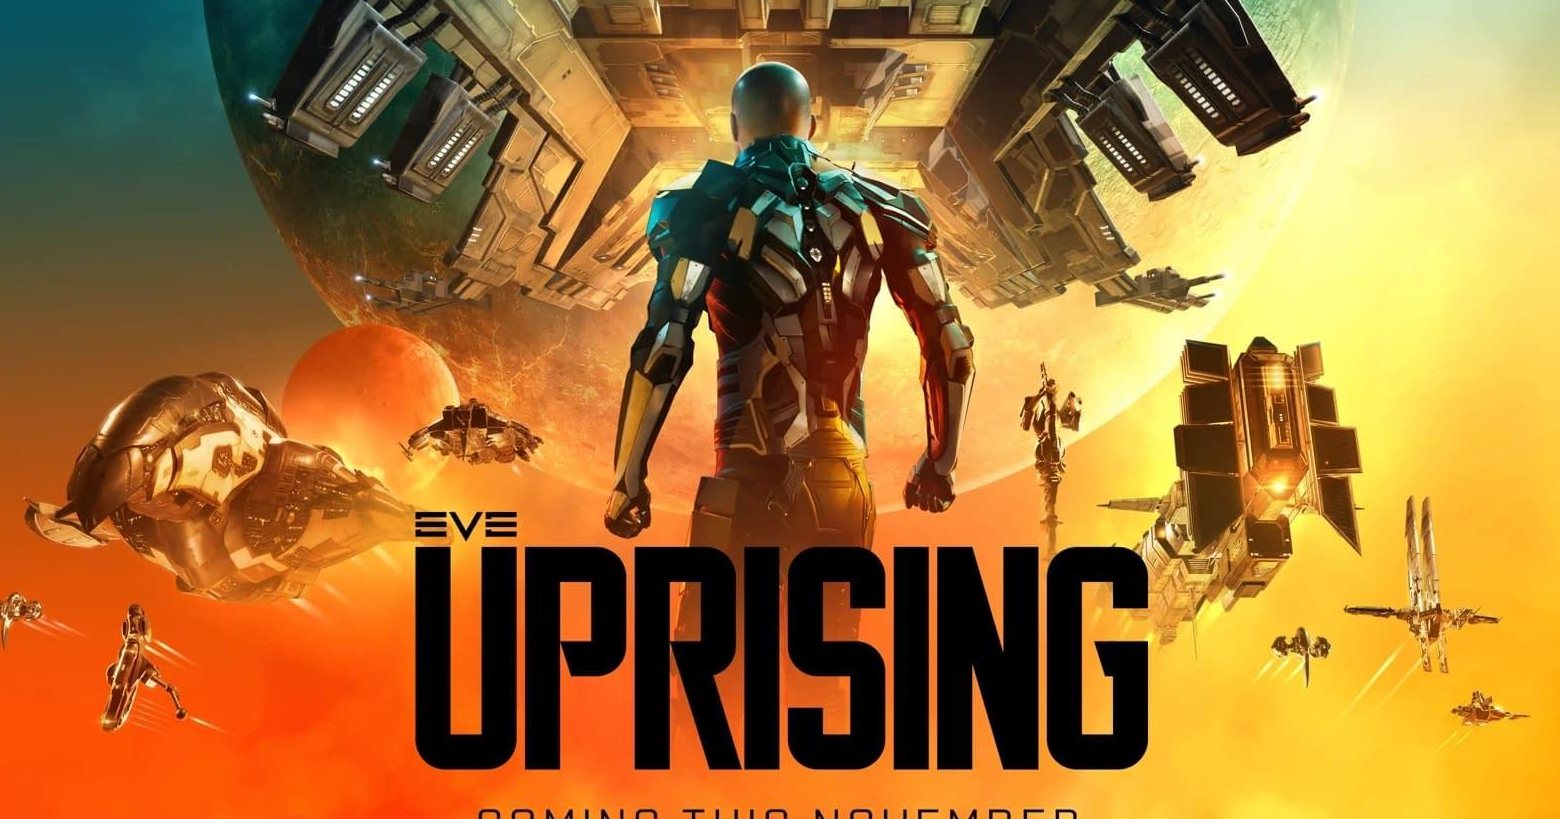 Here we see the cover of EVE: Uprising, which is the new expansion to EVE Online and is playable starting today. In the picture we see the expansion title and above it a game character in front of a multitude of spaceships.